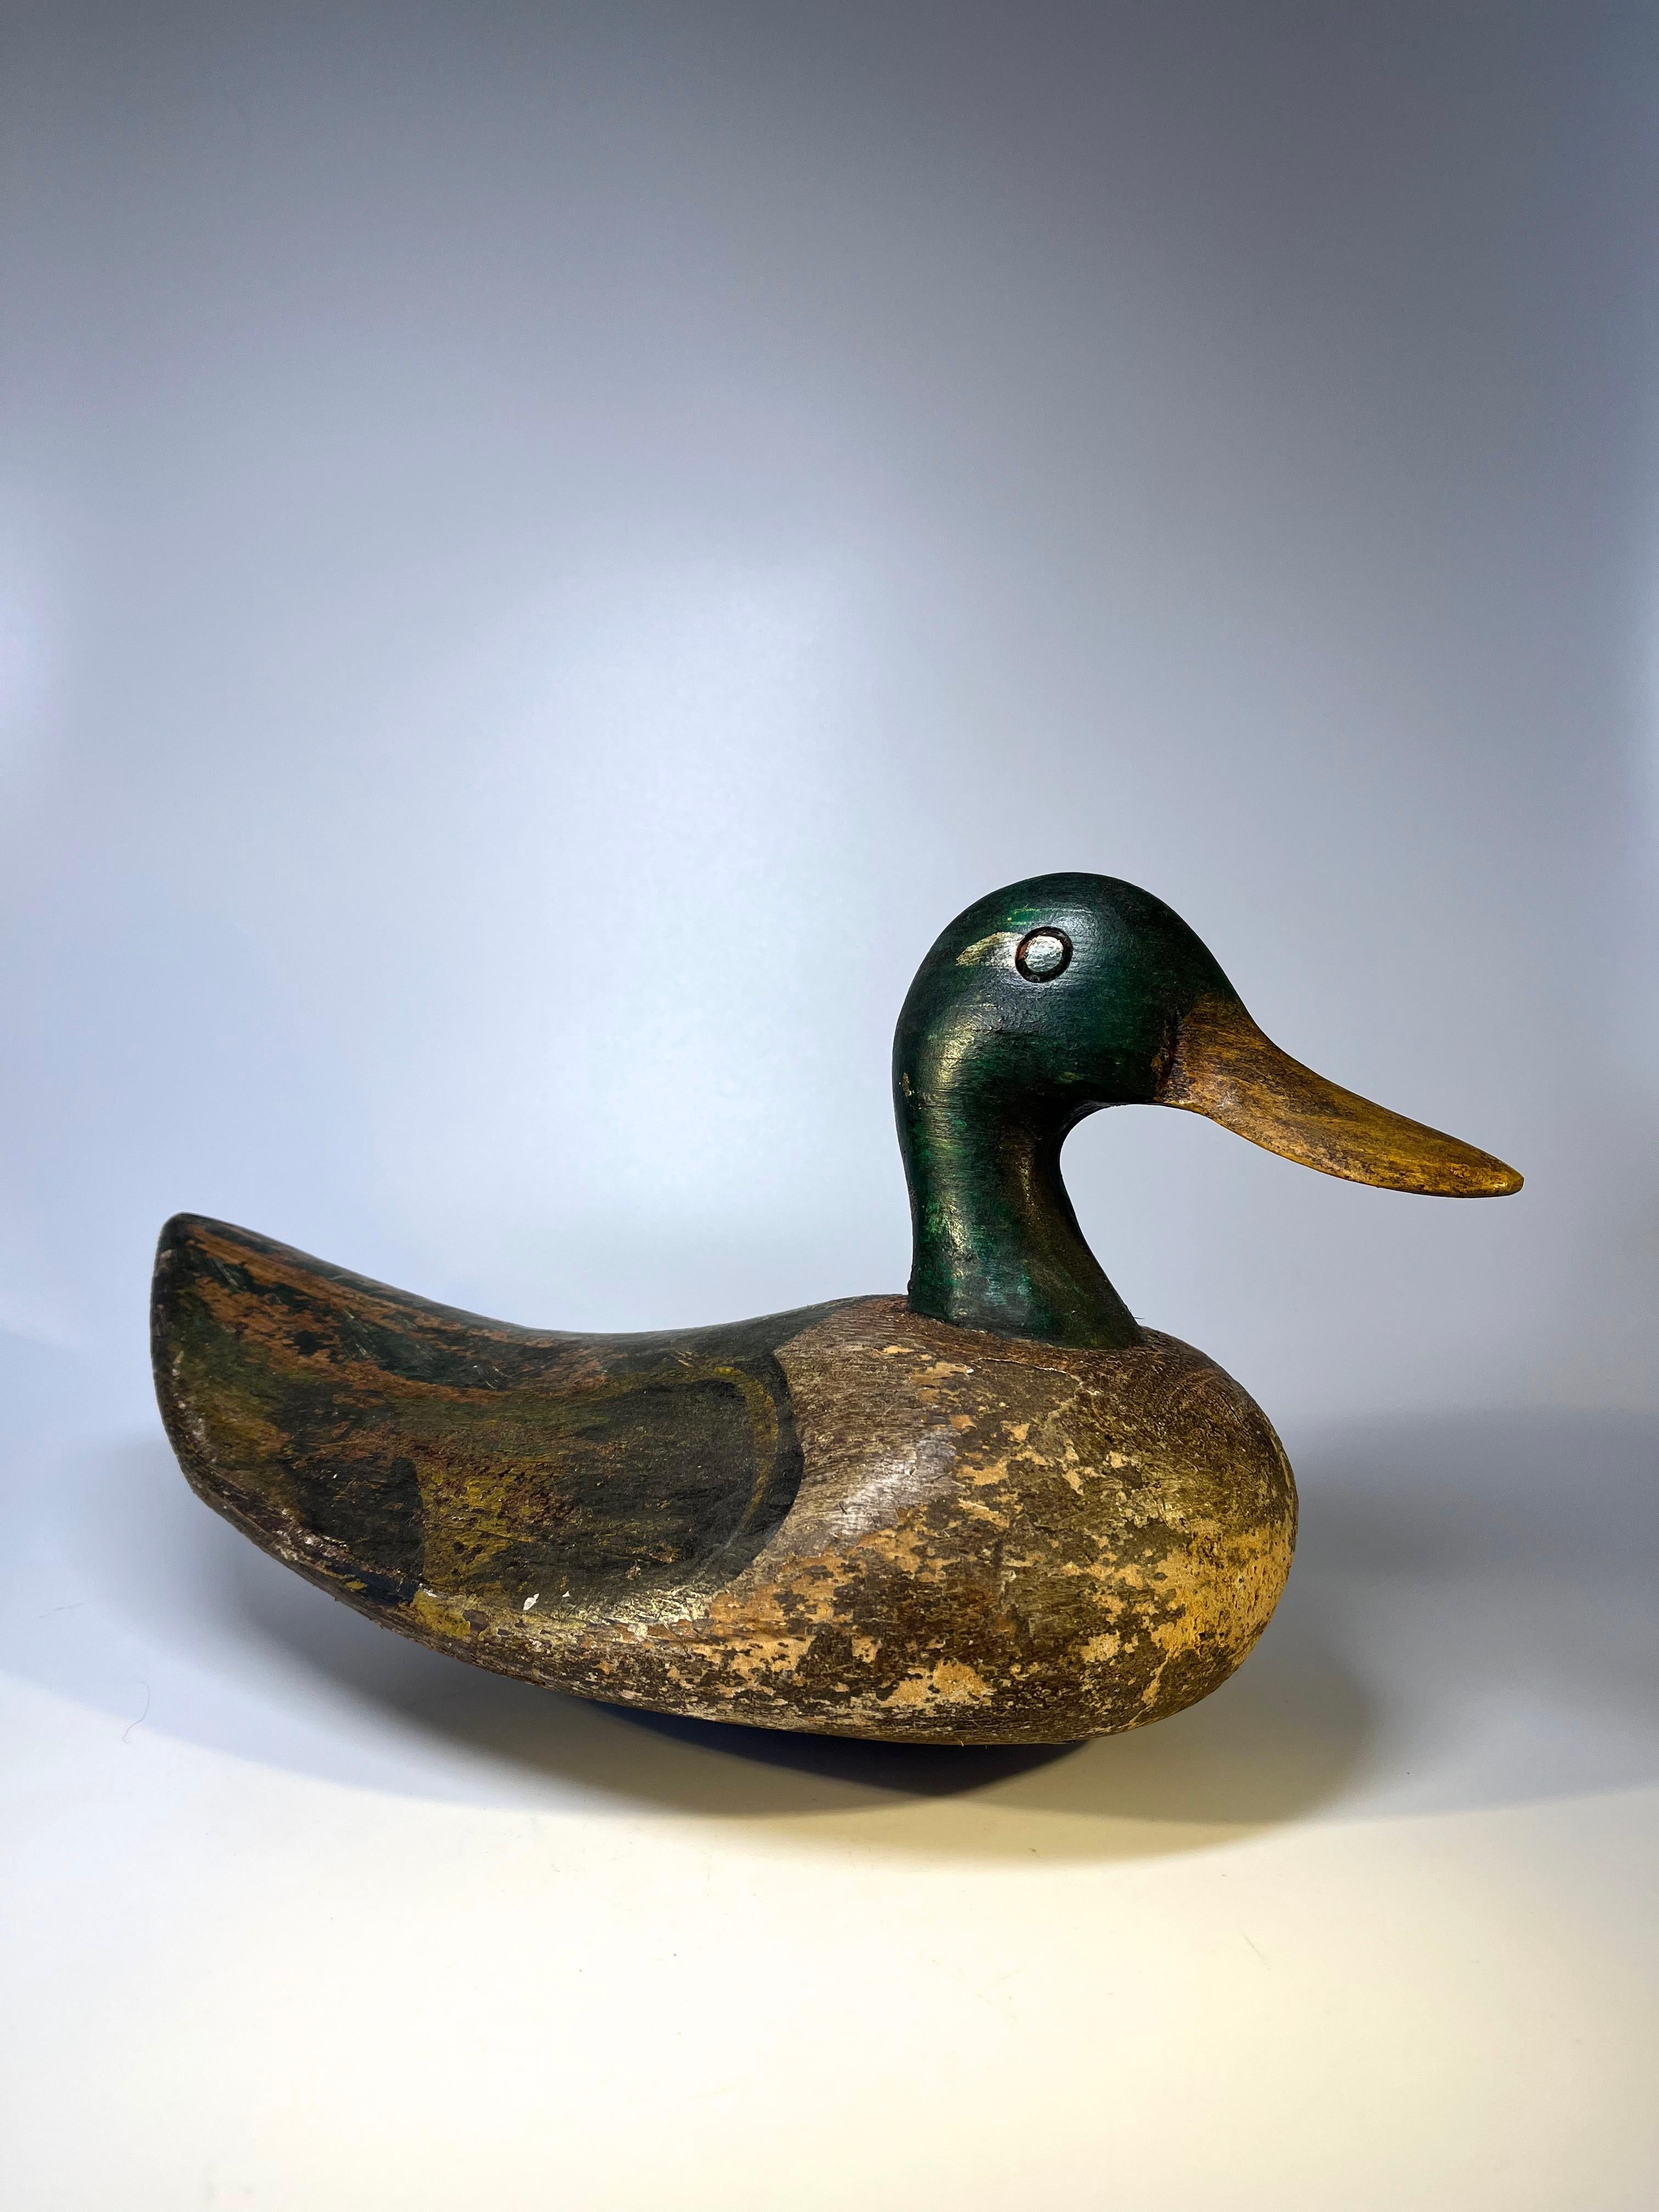 A superior antique English wood and cork Mallard drake decoy with original paint
Lightweight and hand-carved - large impressionistic shape and form
Circa early 20th century
Measures: Tip of beak to tail 13 inch, Width across body 6 inch, Height 7